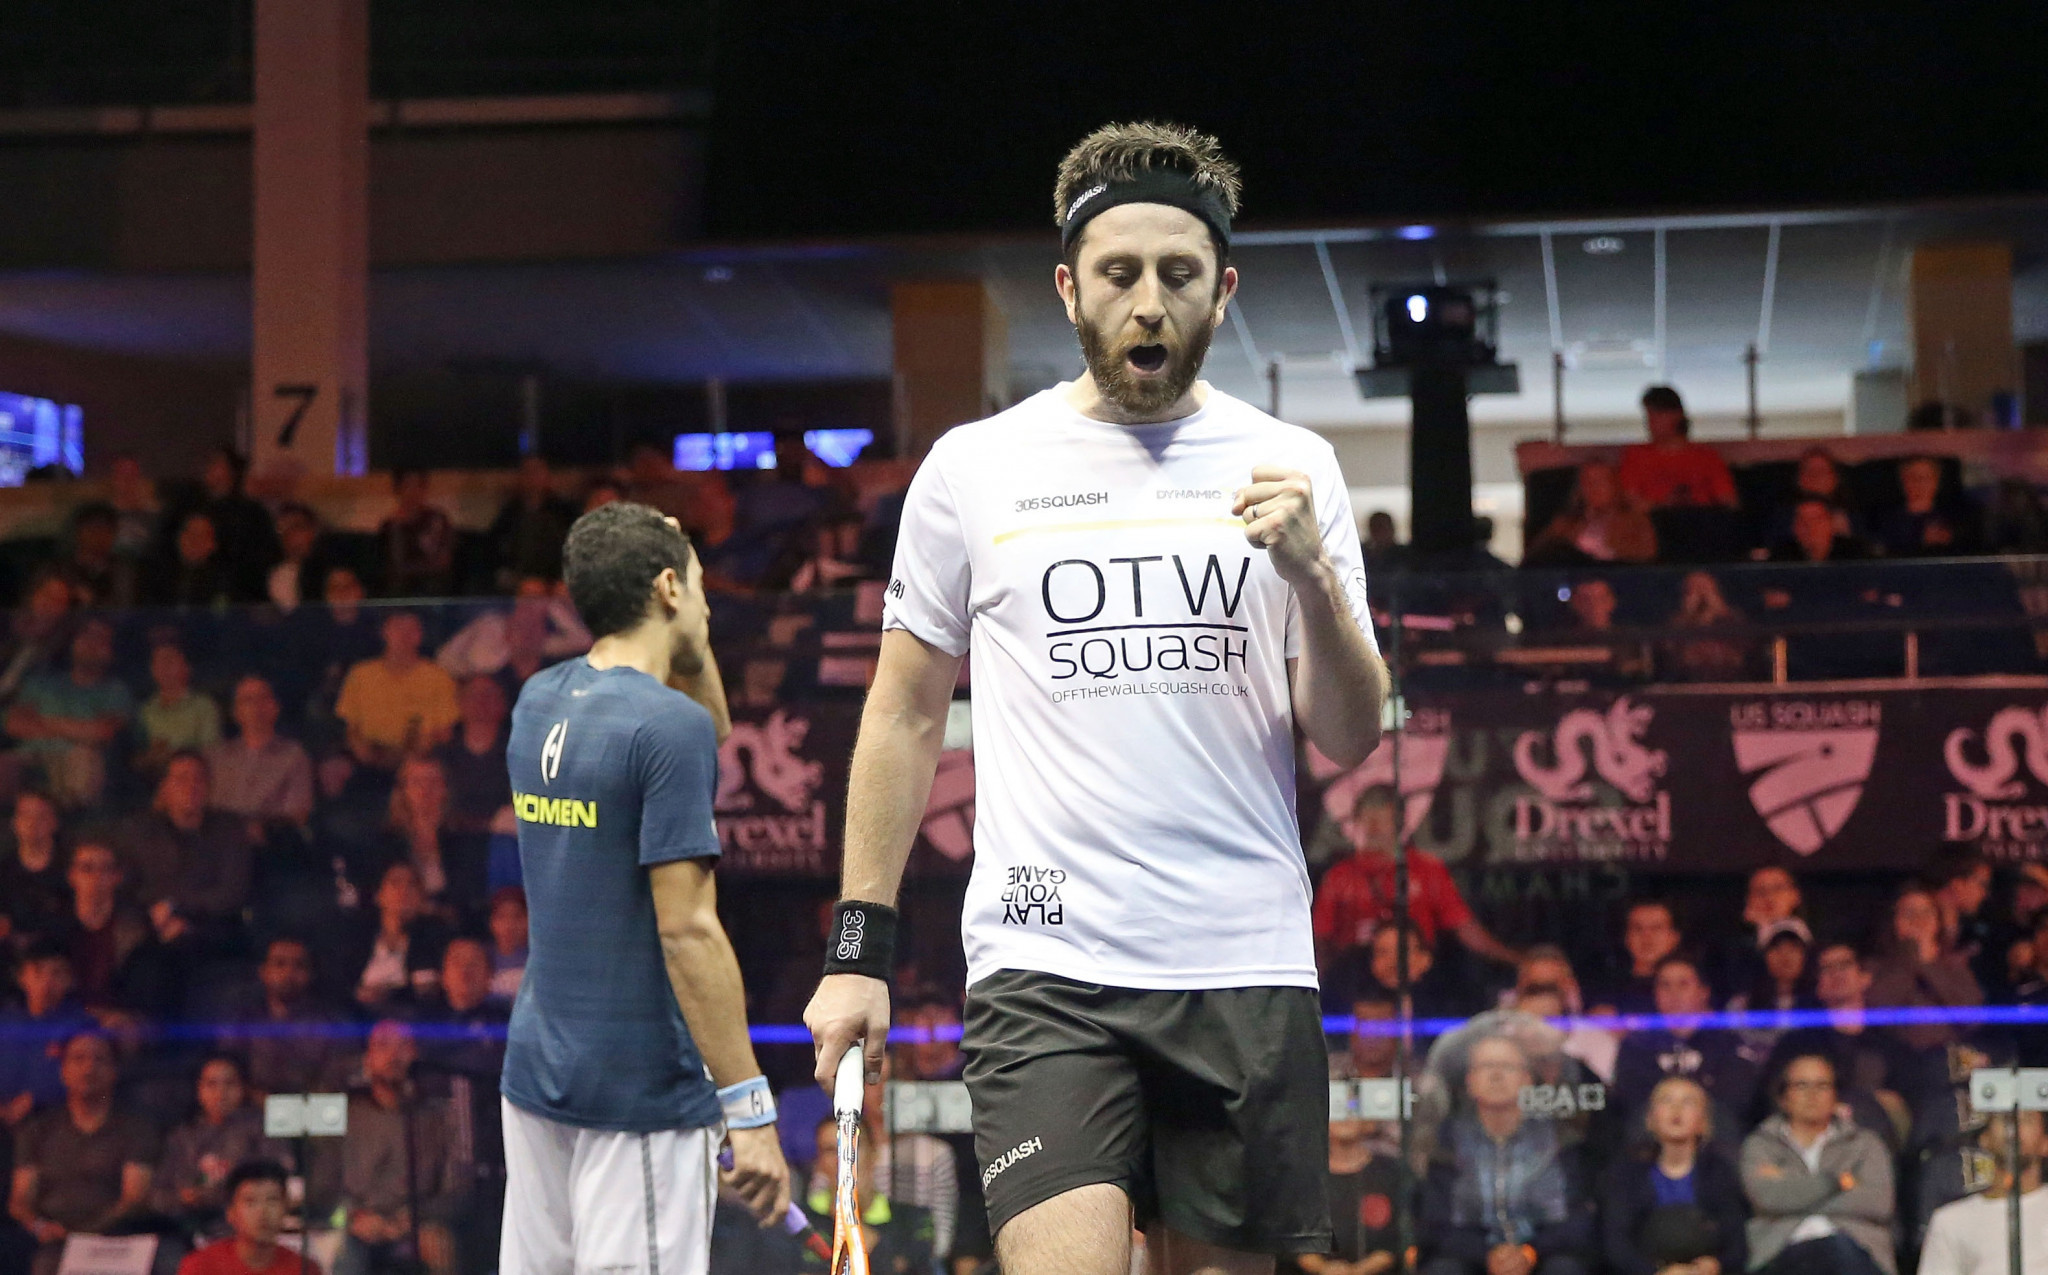 Daryl Selby earned a dramatic five set win over Tarek Momen ©PSA